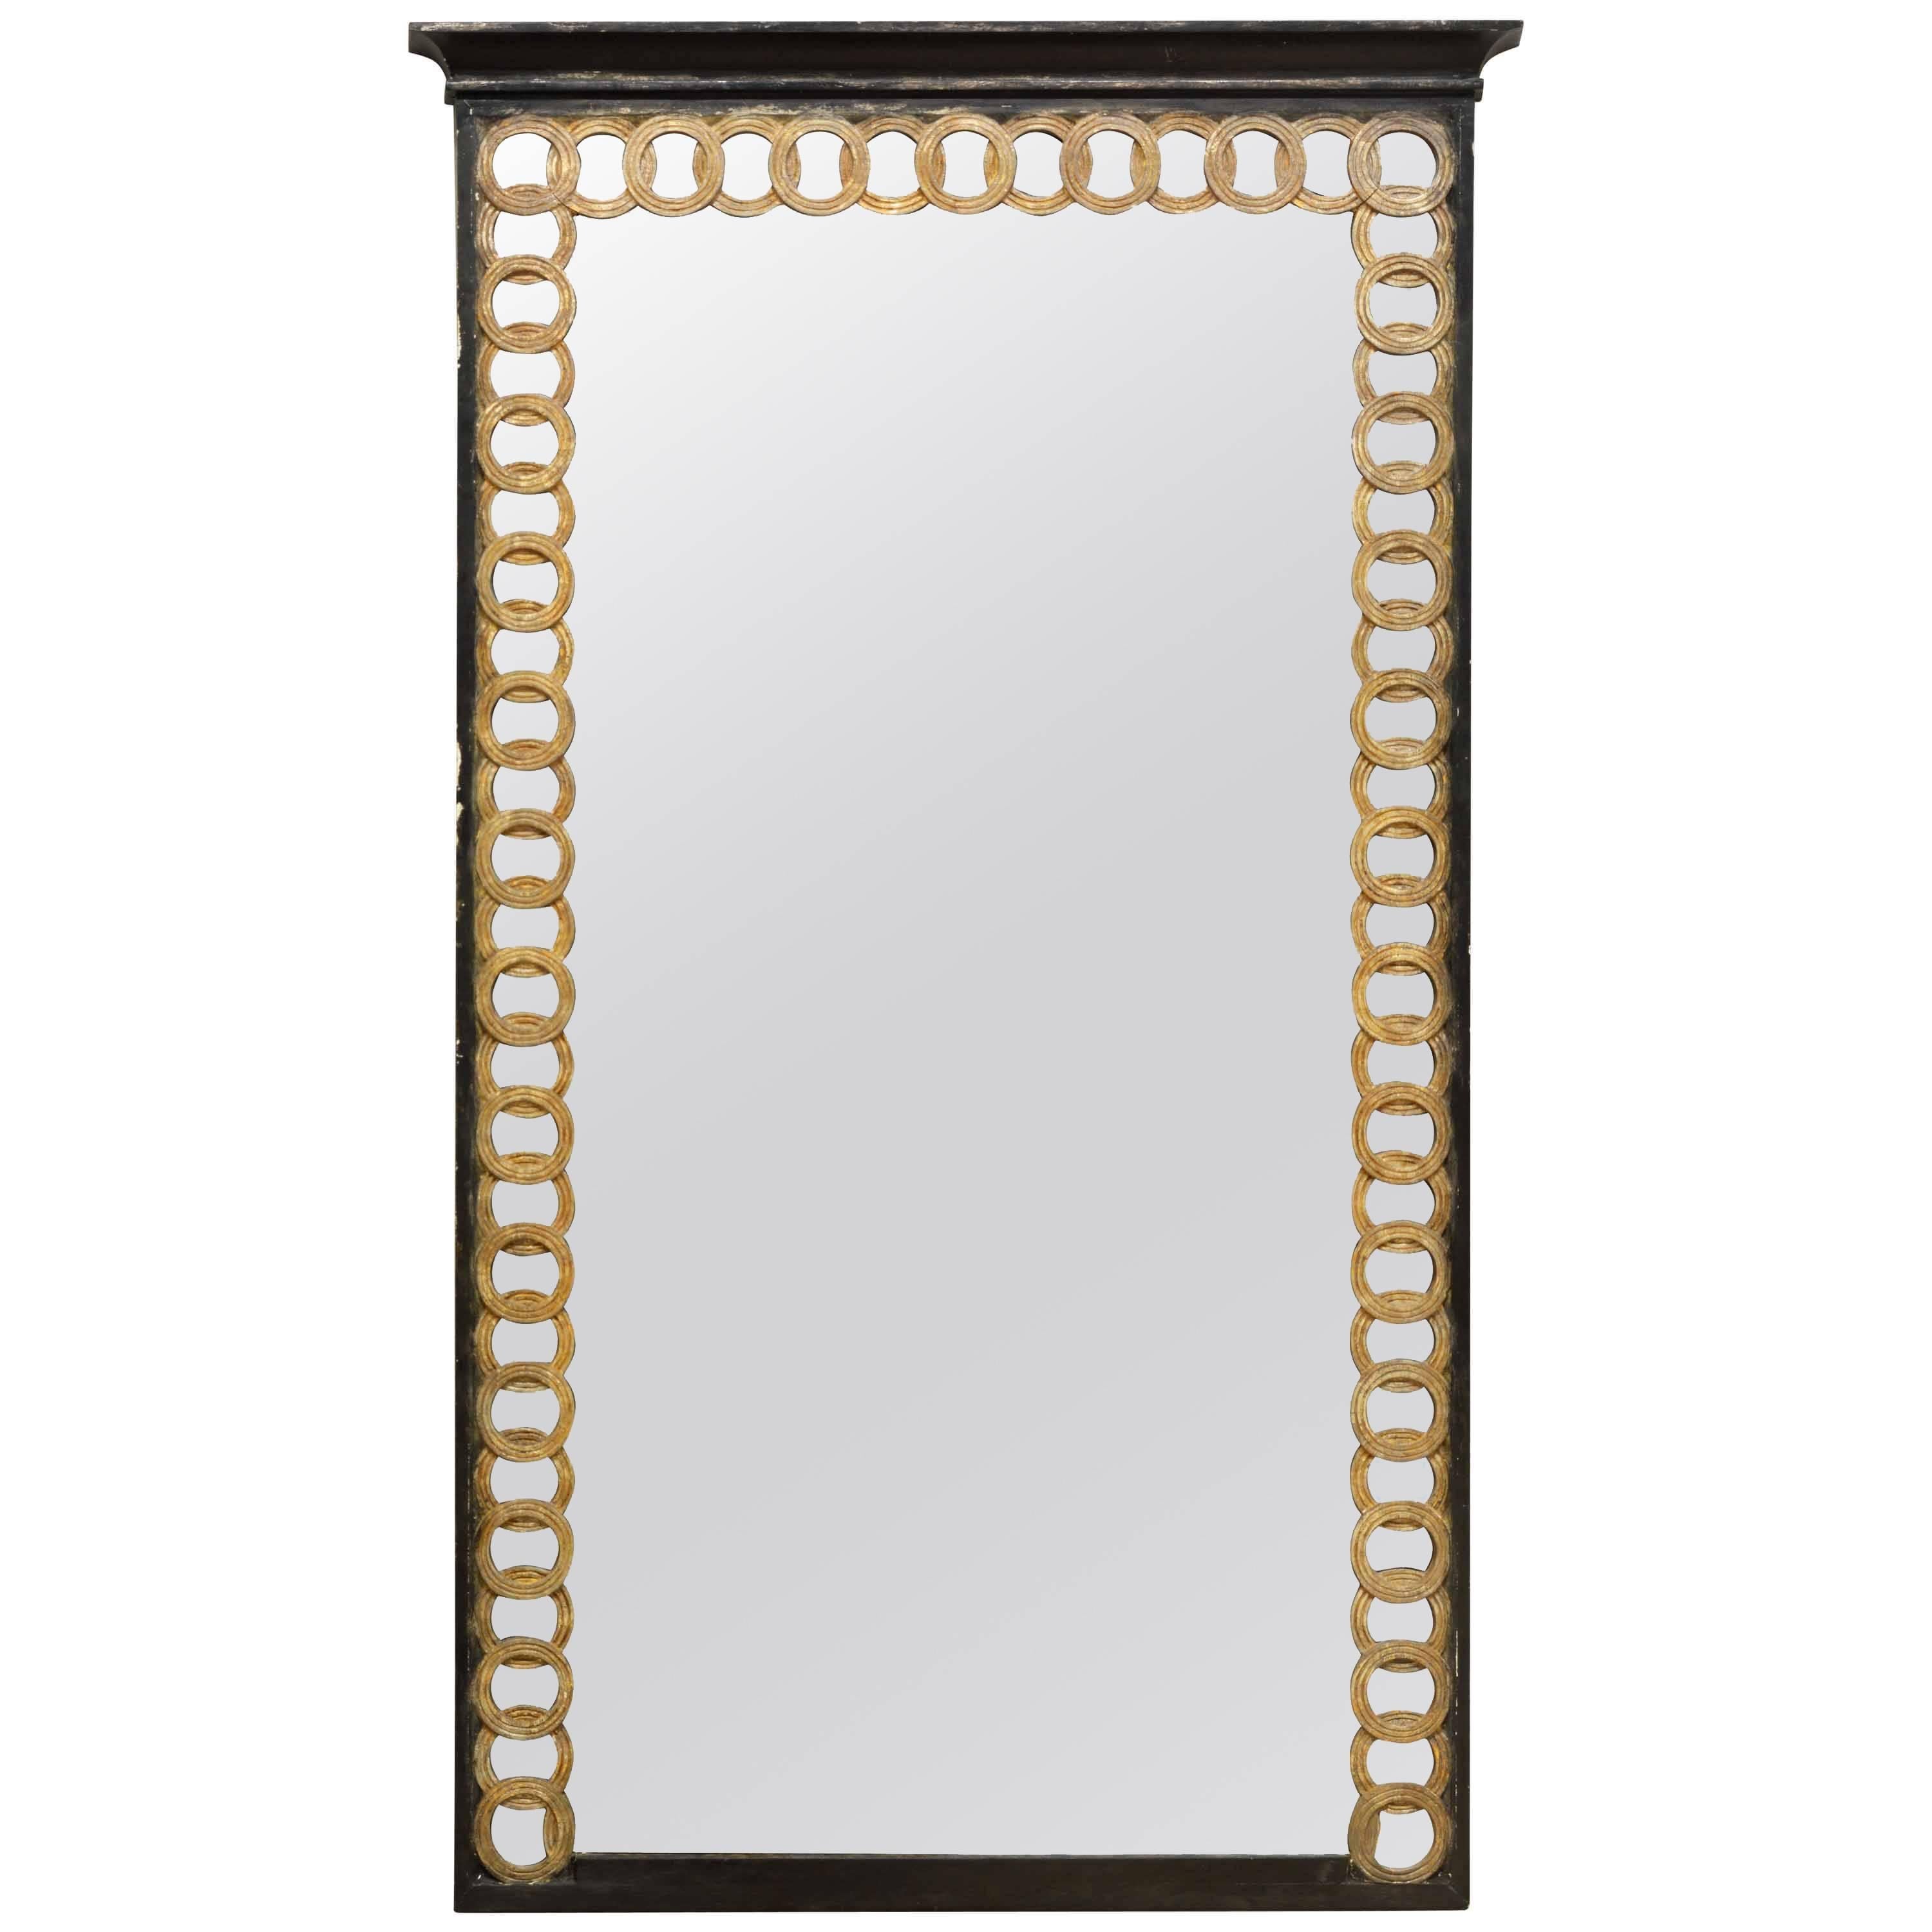 Mid-20th Century Neoclassical Style Paint & Parcel-Gilt Mirror, Palladio, Italy